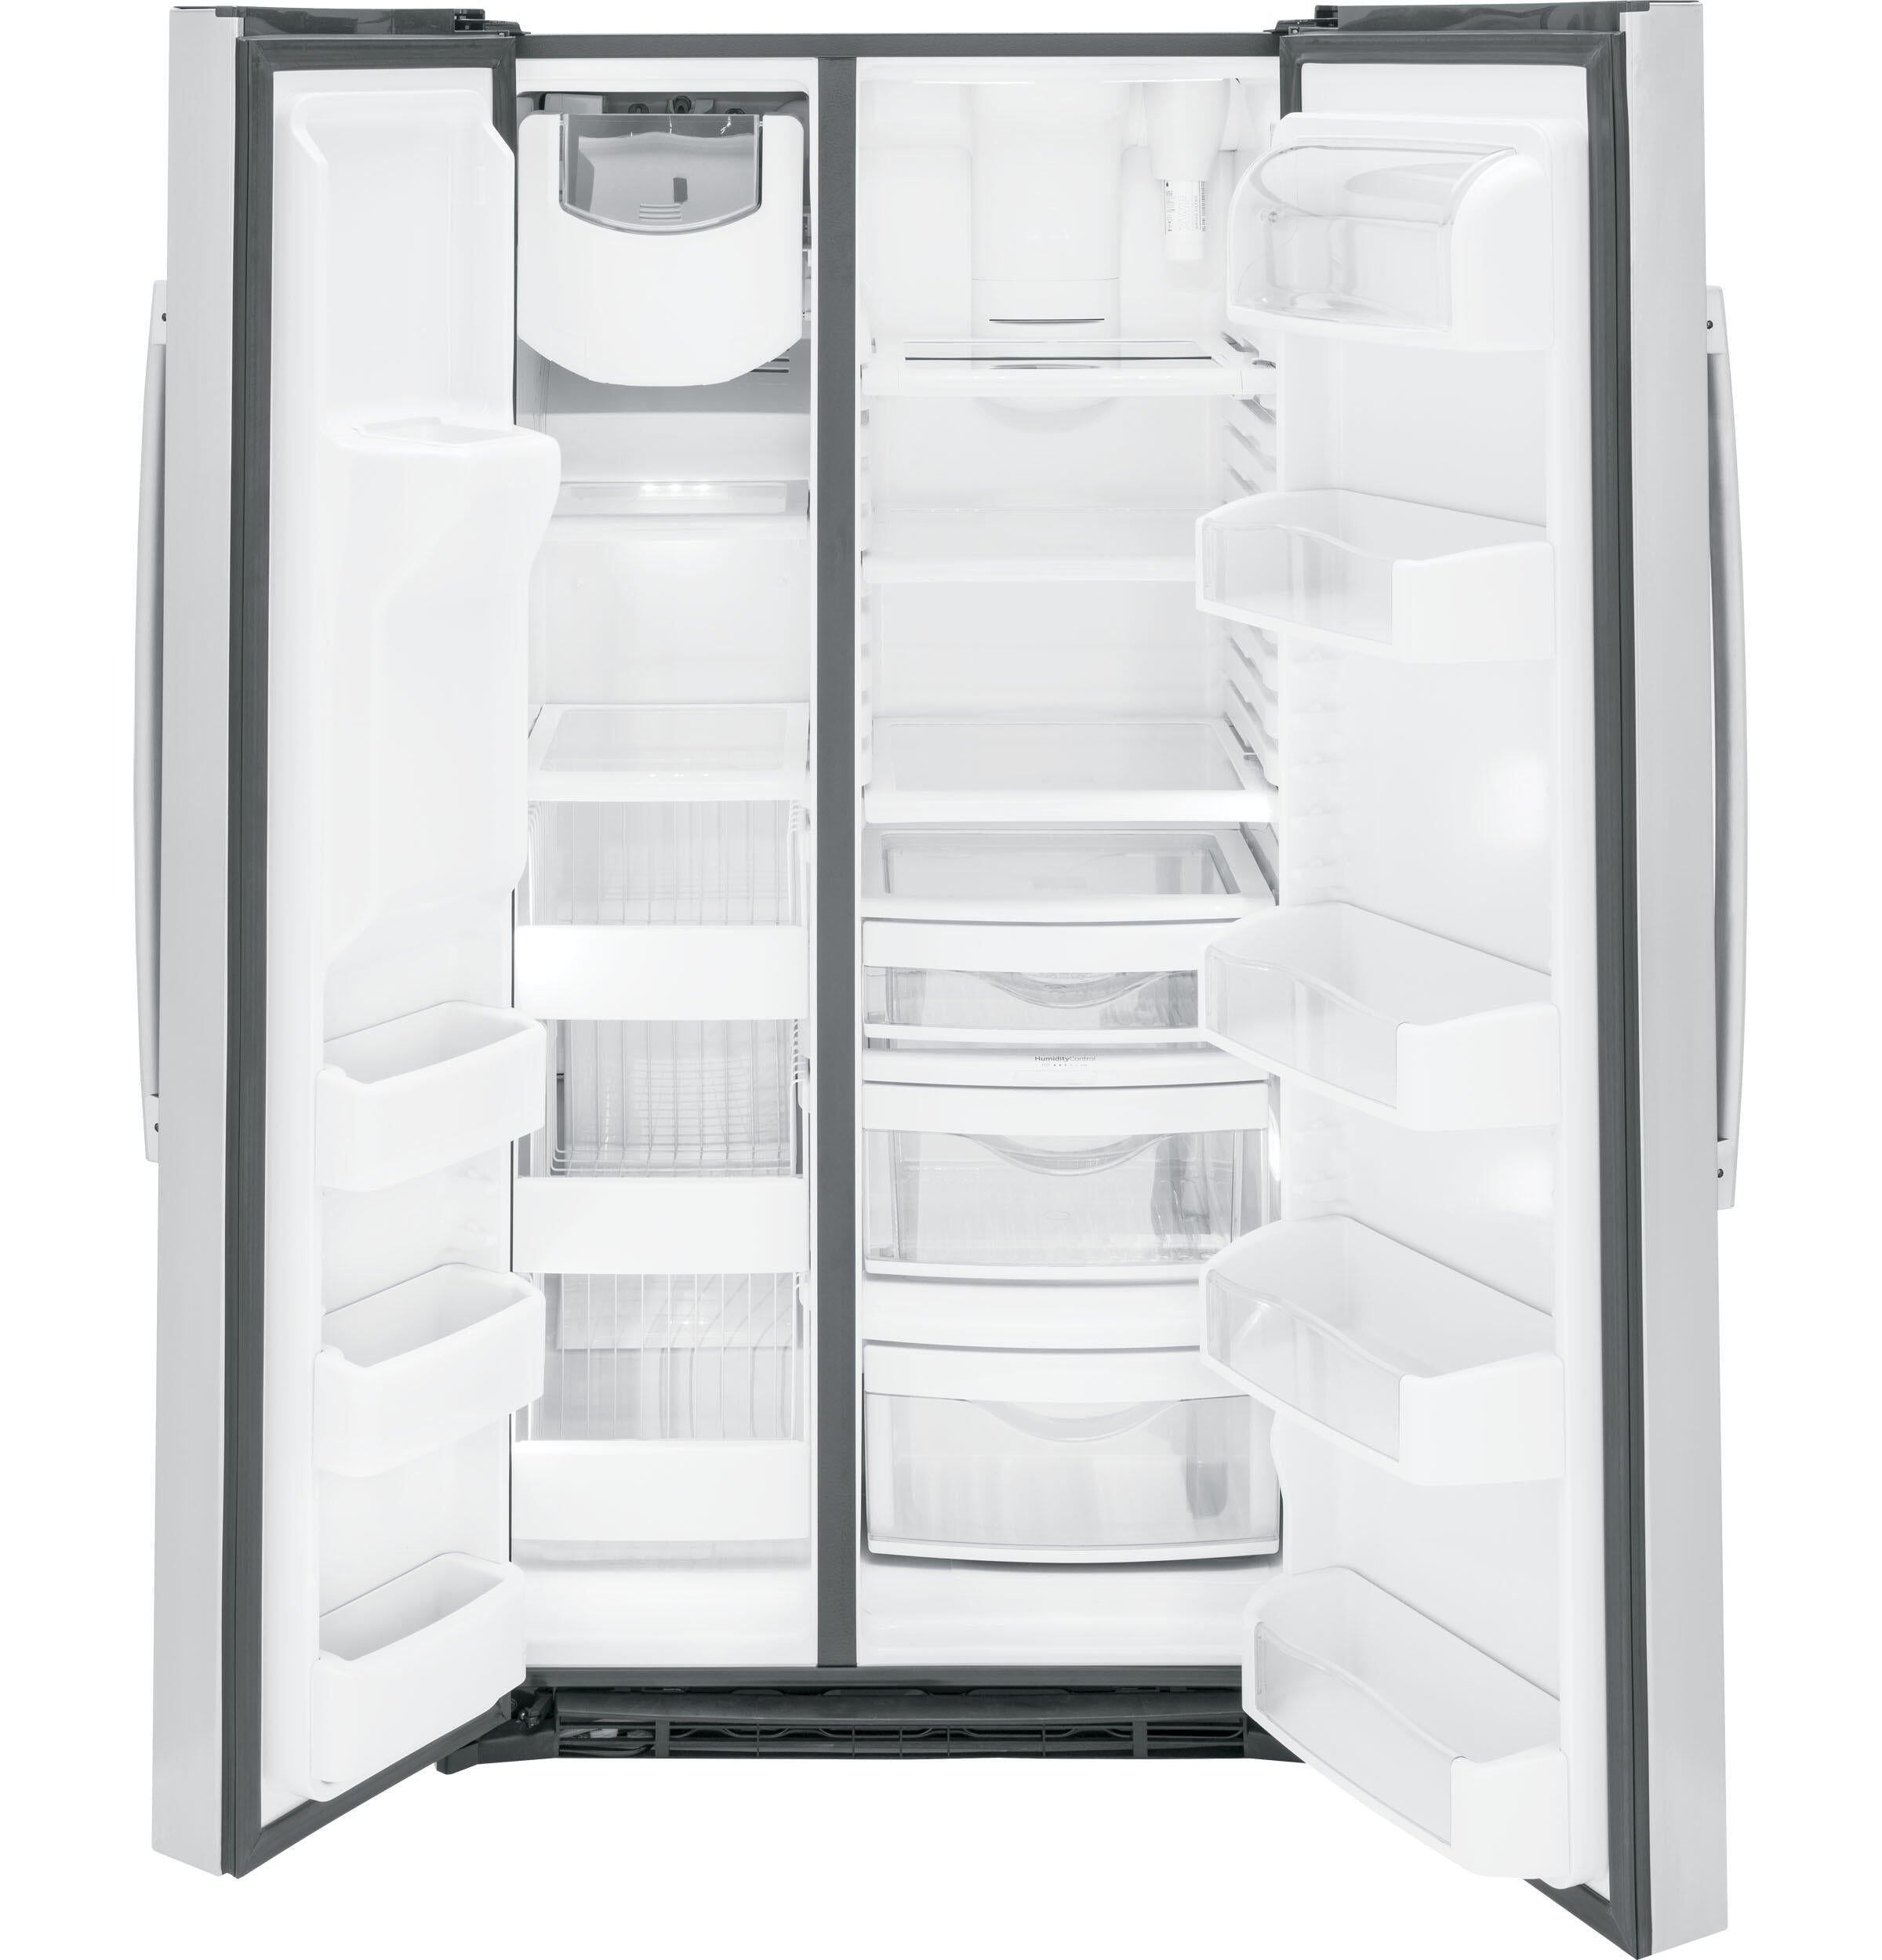 GE PSE25KYHFS Profile 36 25.3 Cu.Ft. Stainless Steel Side-By-Side Refrigerator - Energy Star